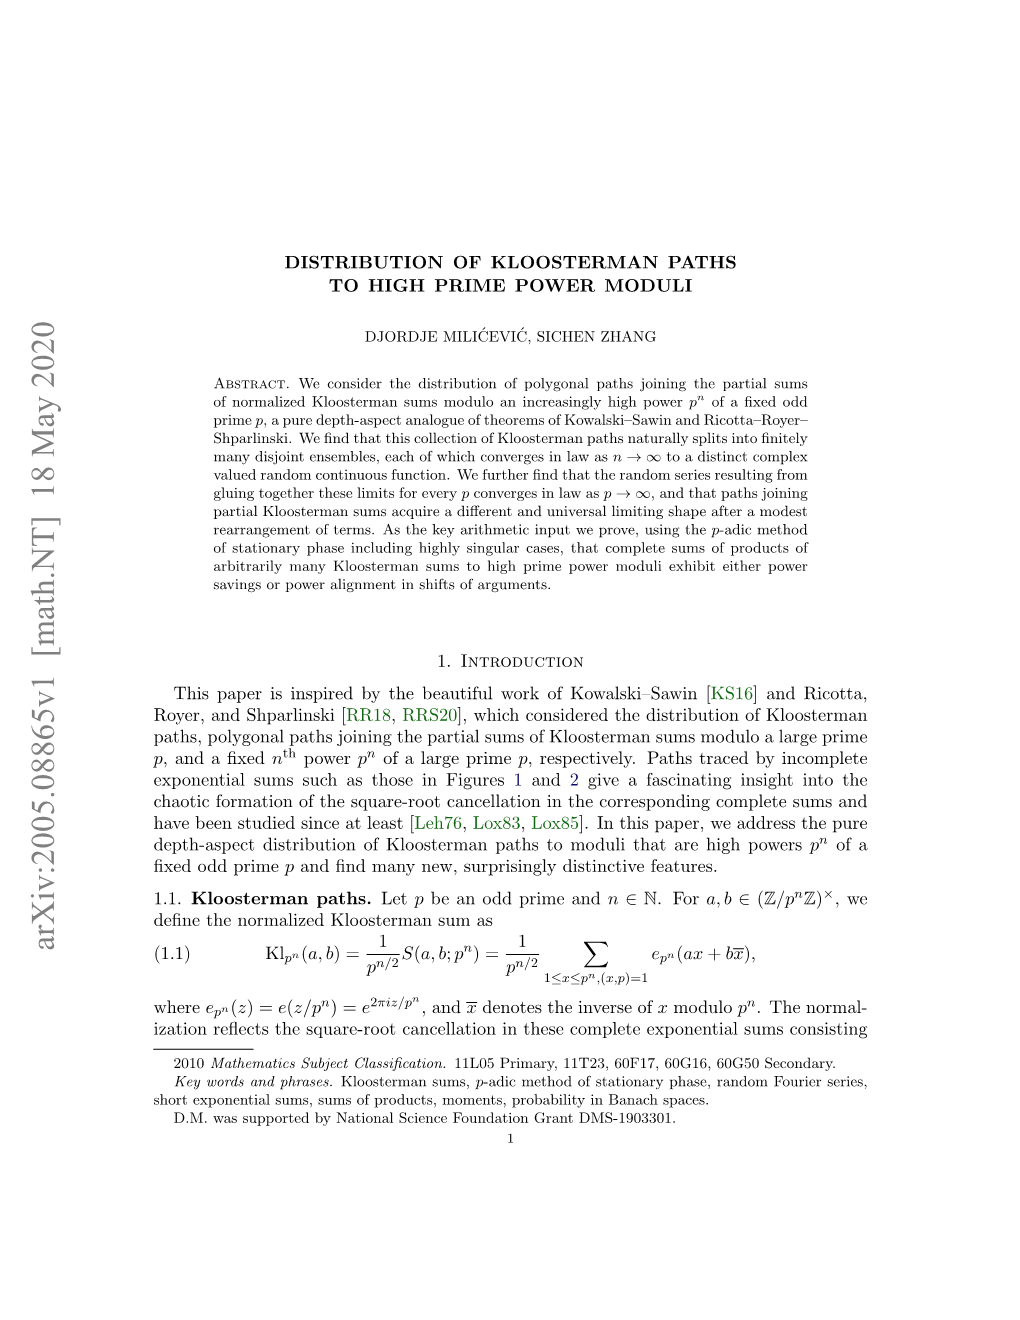 Distribution of Kloosterman Paths to High Prime Power Moduli